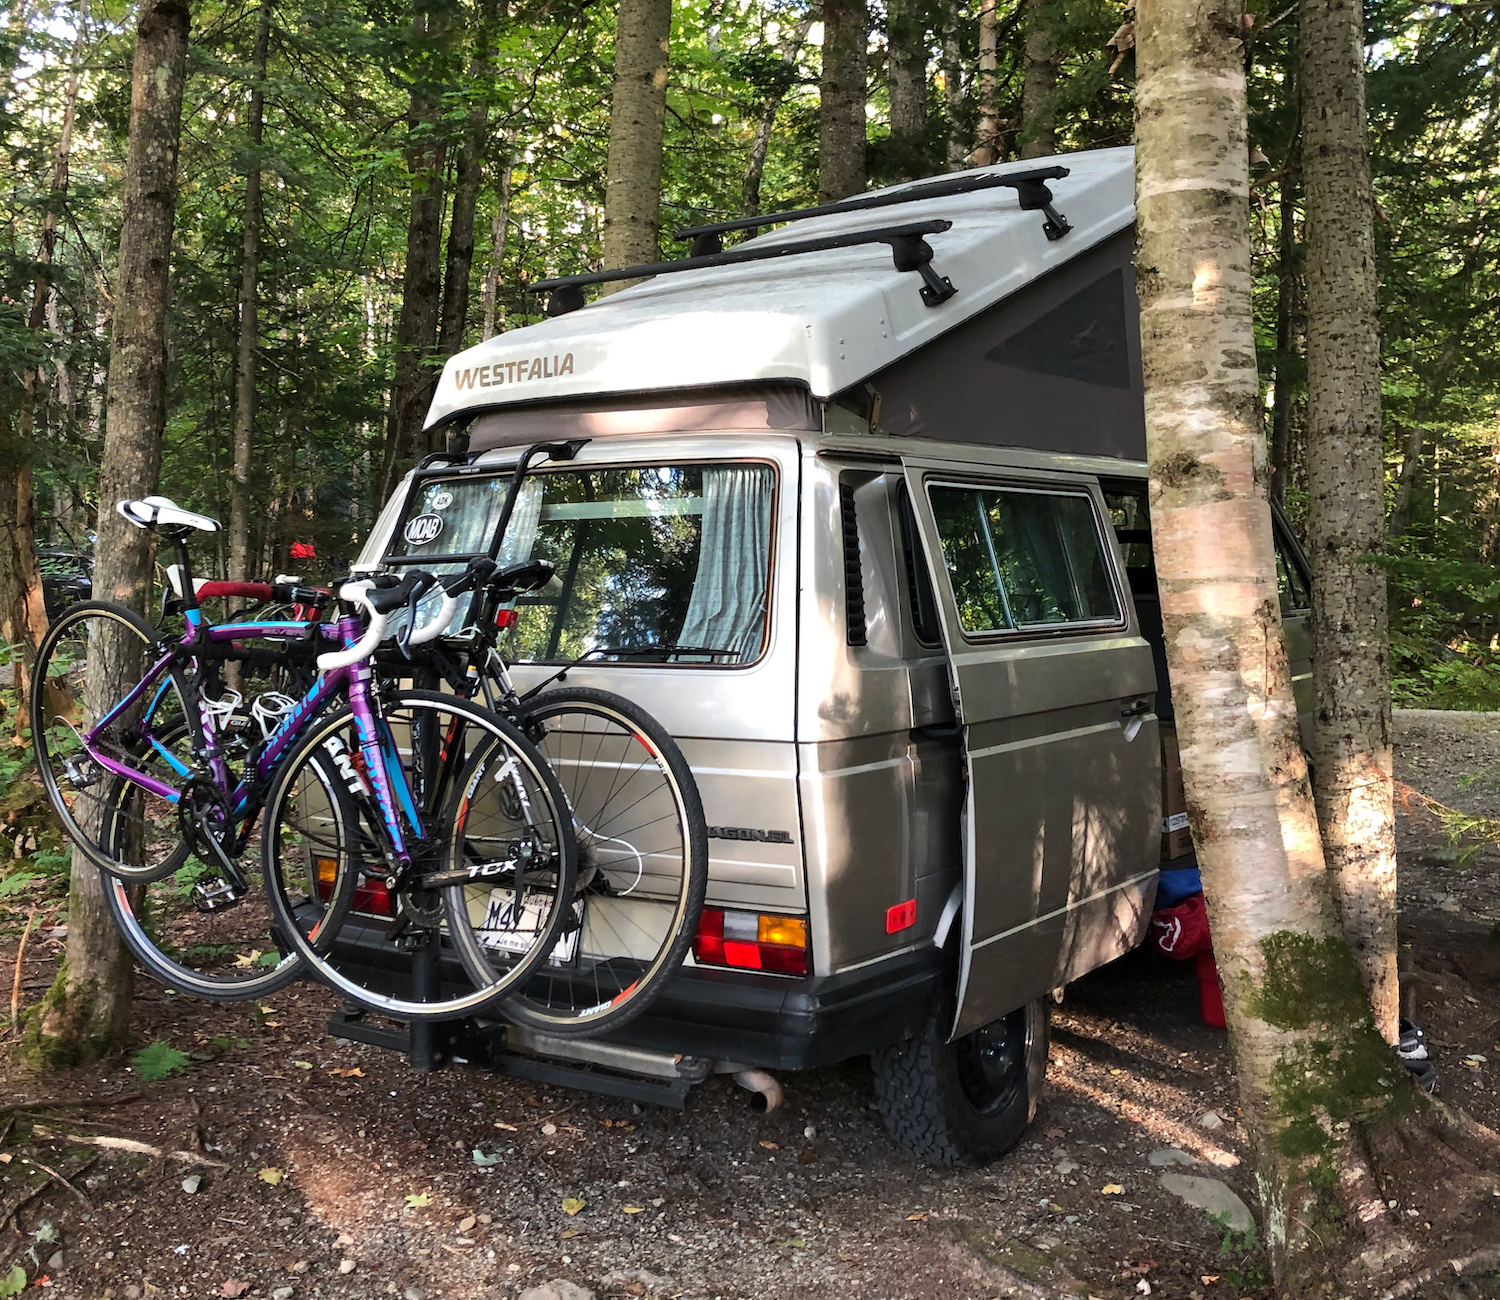 A bike rack on the back of a 1990 Volkswagen Vanagon Westfalia. That's just one of the tips we got from someone who owns the camper van.